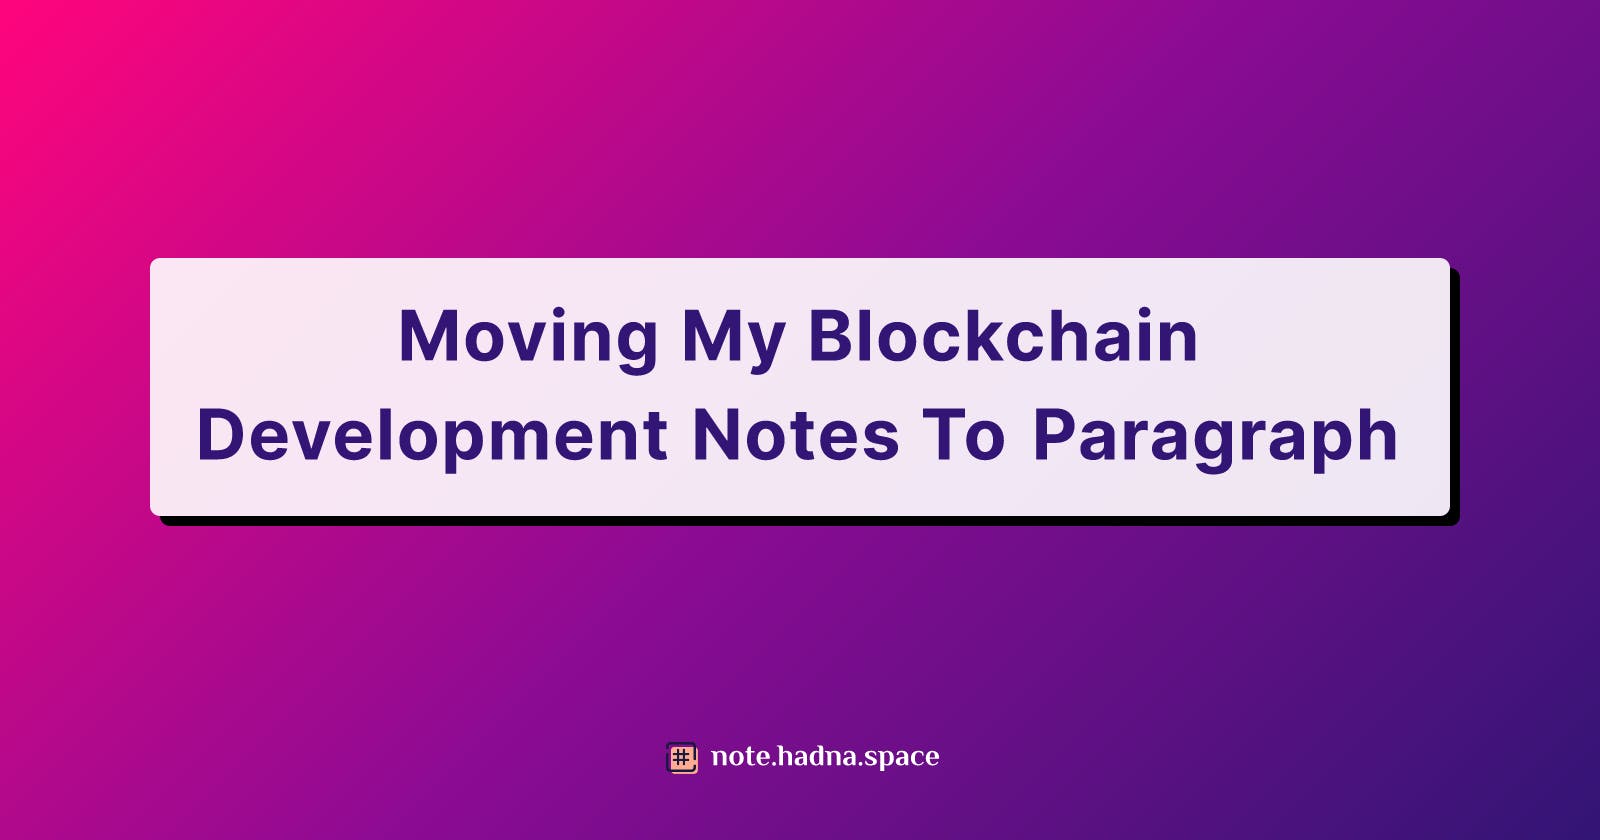 Moving My Blockchain Development Notes To Paragraph